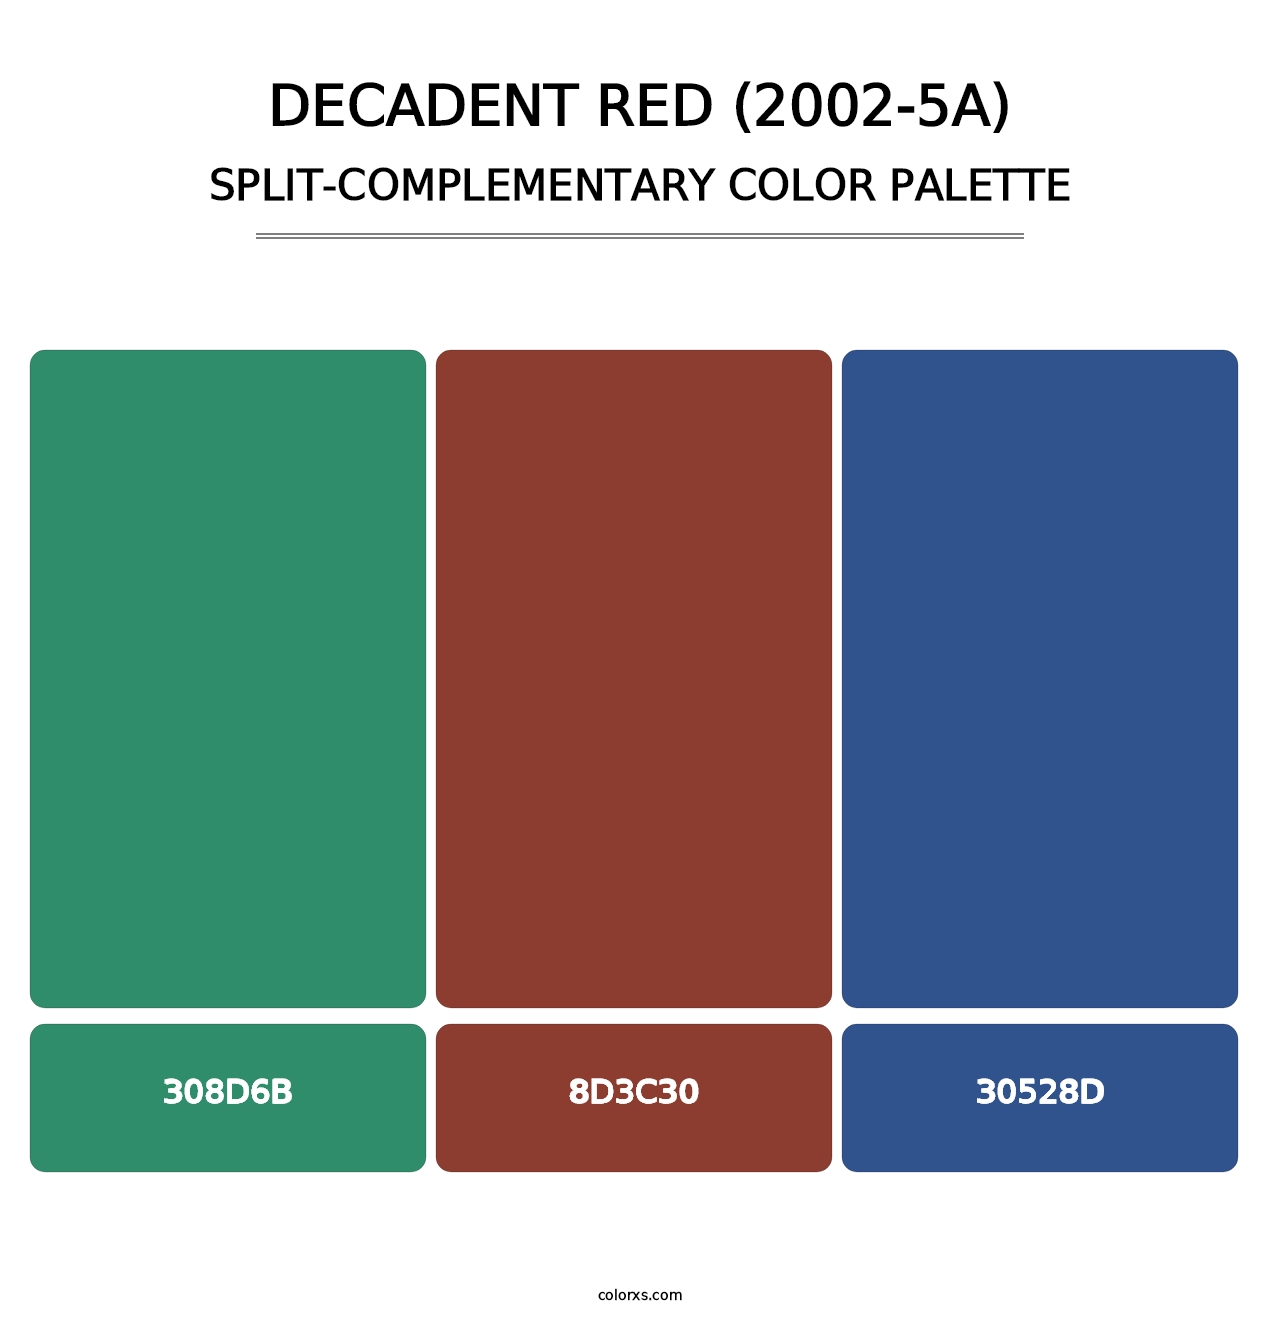 Decadent Red (2002-5A) - Split-Complementary Color Palette